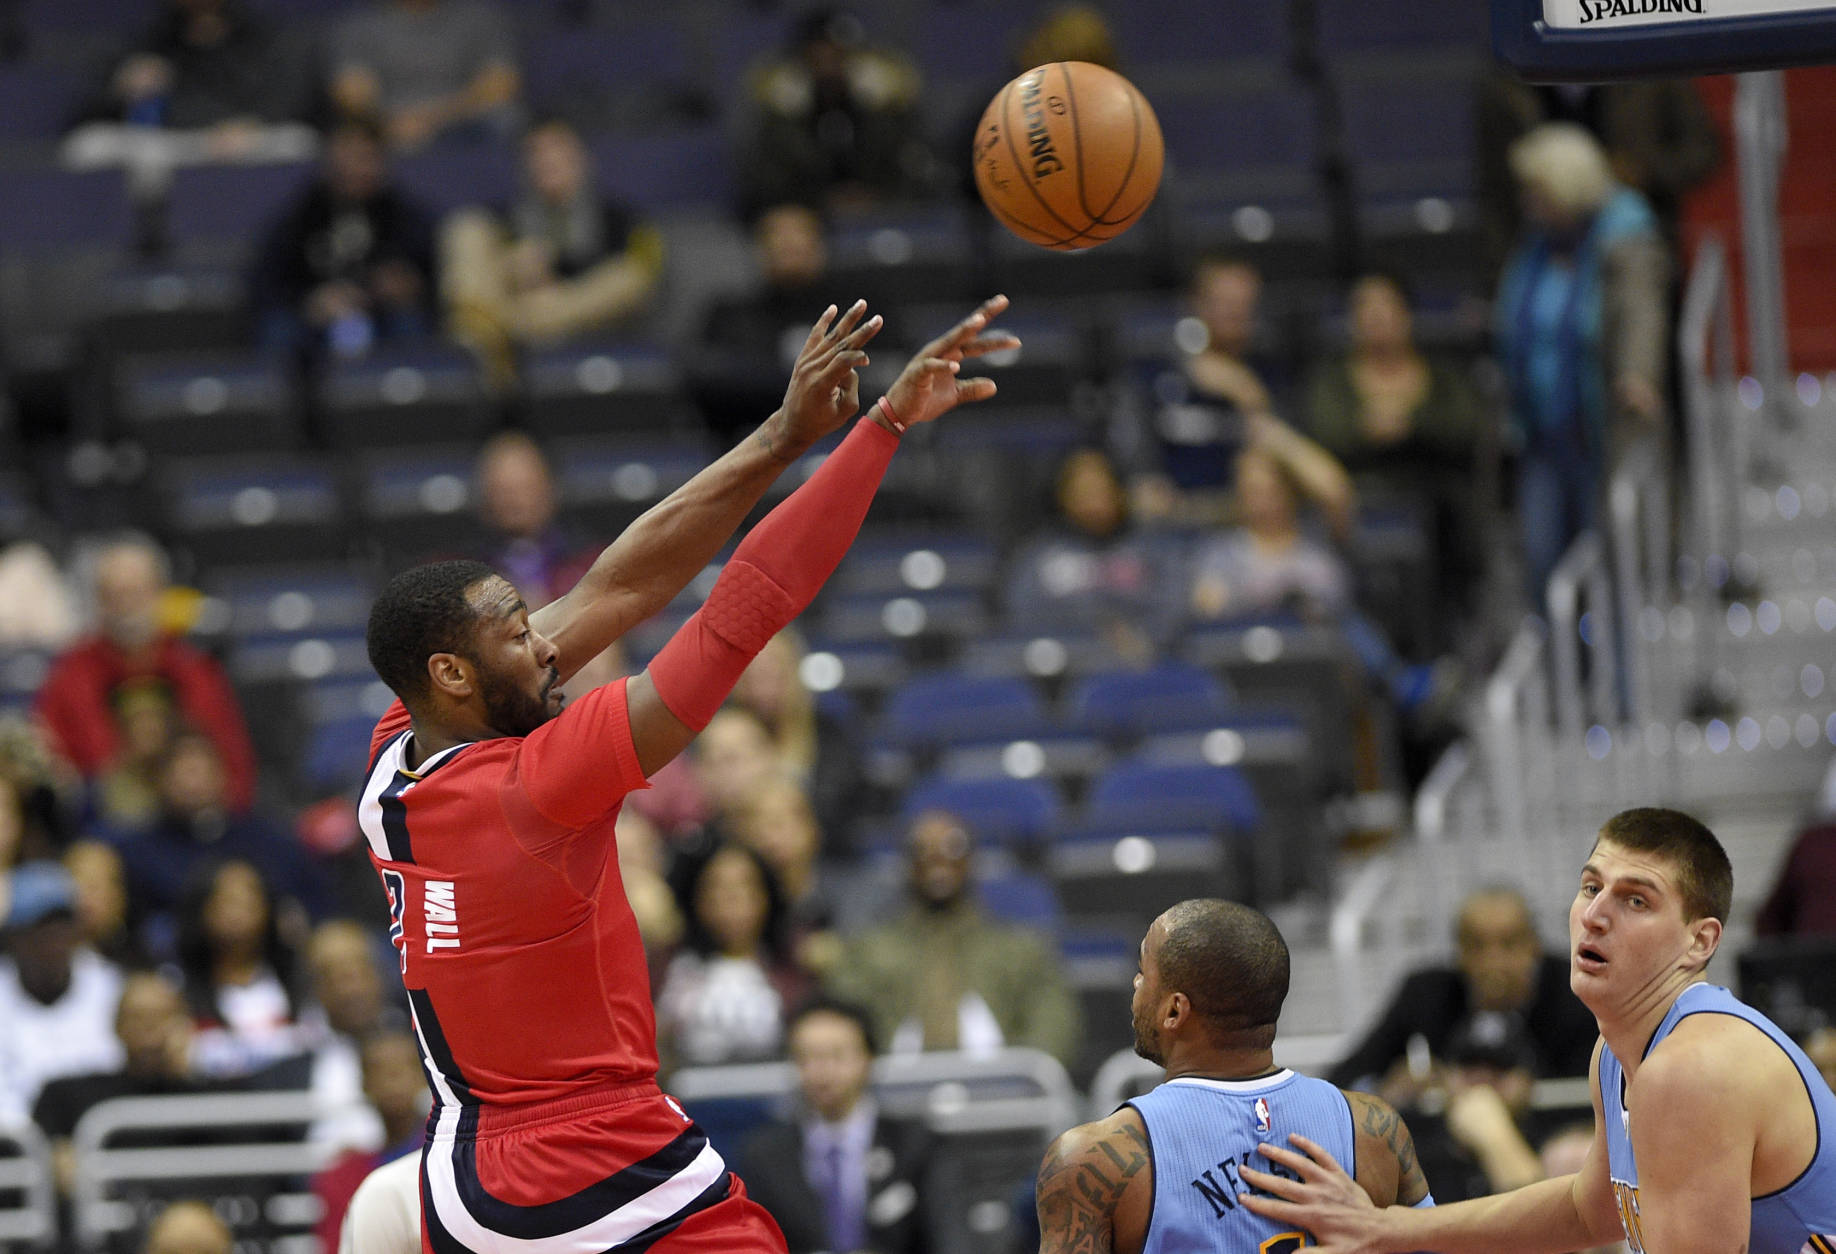 Washington Wizards guard John Wall (2) passes the ball over Denver Nuggets guard Jameer Nelson (1), bottom center, and Denver Nuggets forward Nikola Jokic, of Serbia, bottom right, during the first half of an NBA basketball game, Thursday, Dec. 8, 2016, in Washington. (AP Photo/Nick Wass)